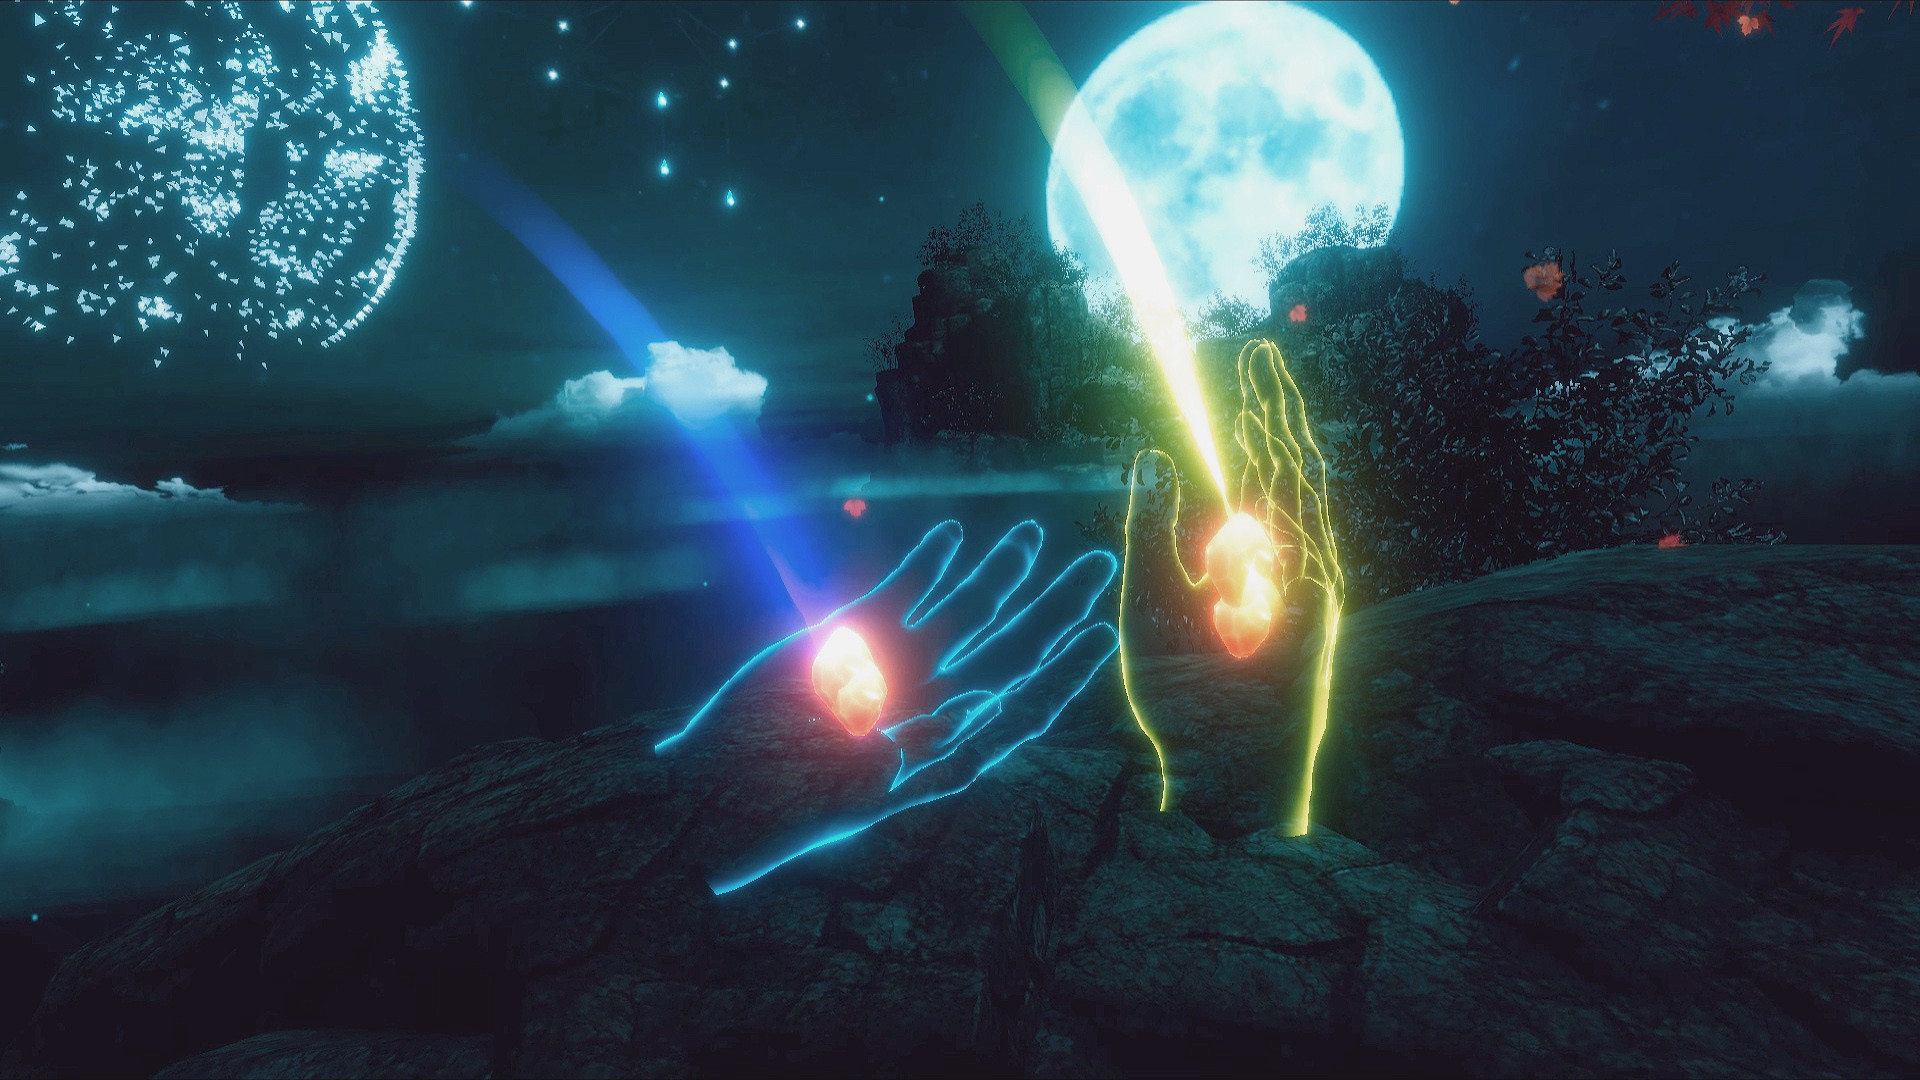 Soulpath: the final journey Free Download